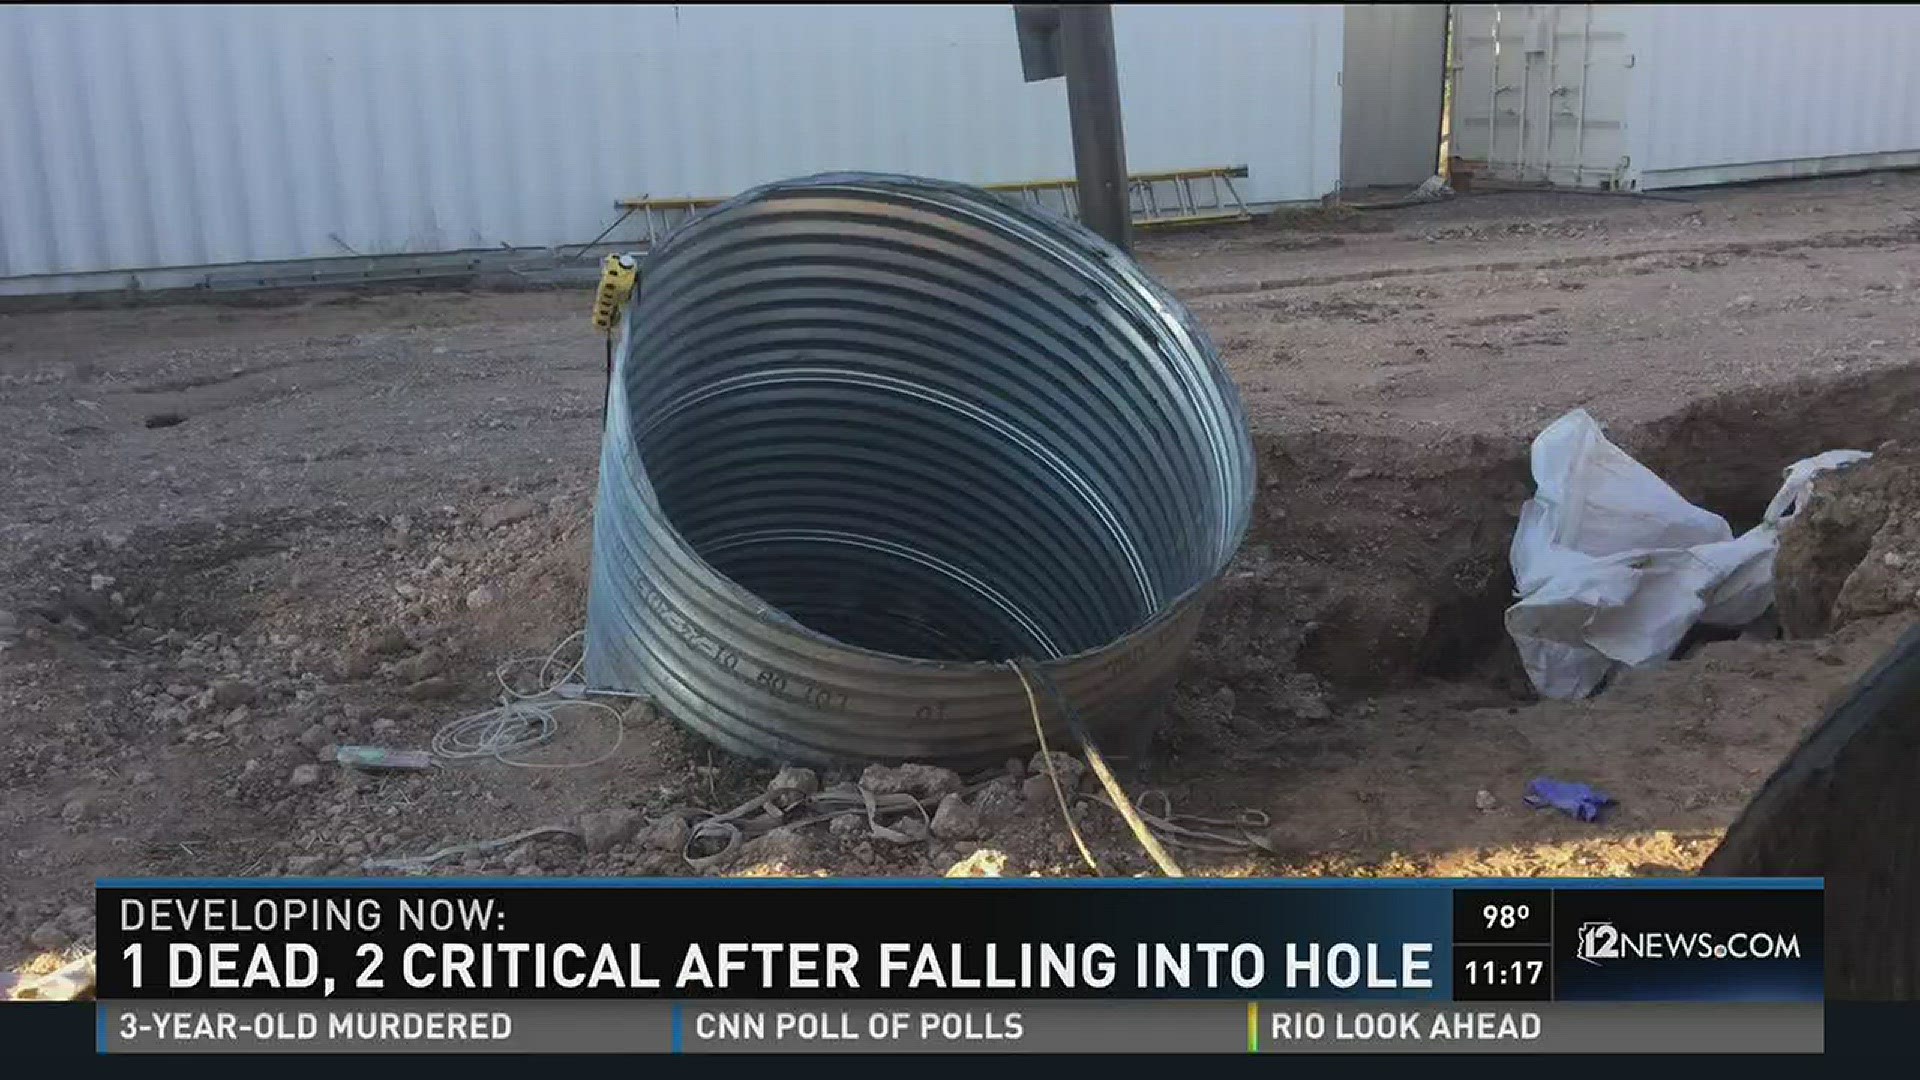 1 dead, 2 critical after falling into hole.